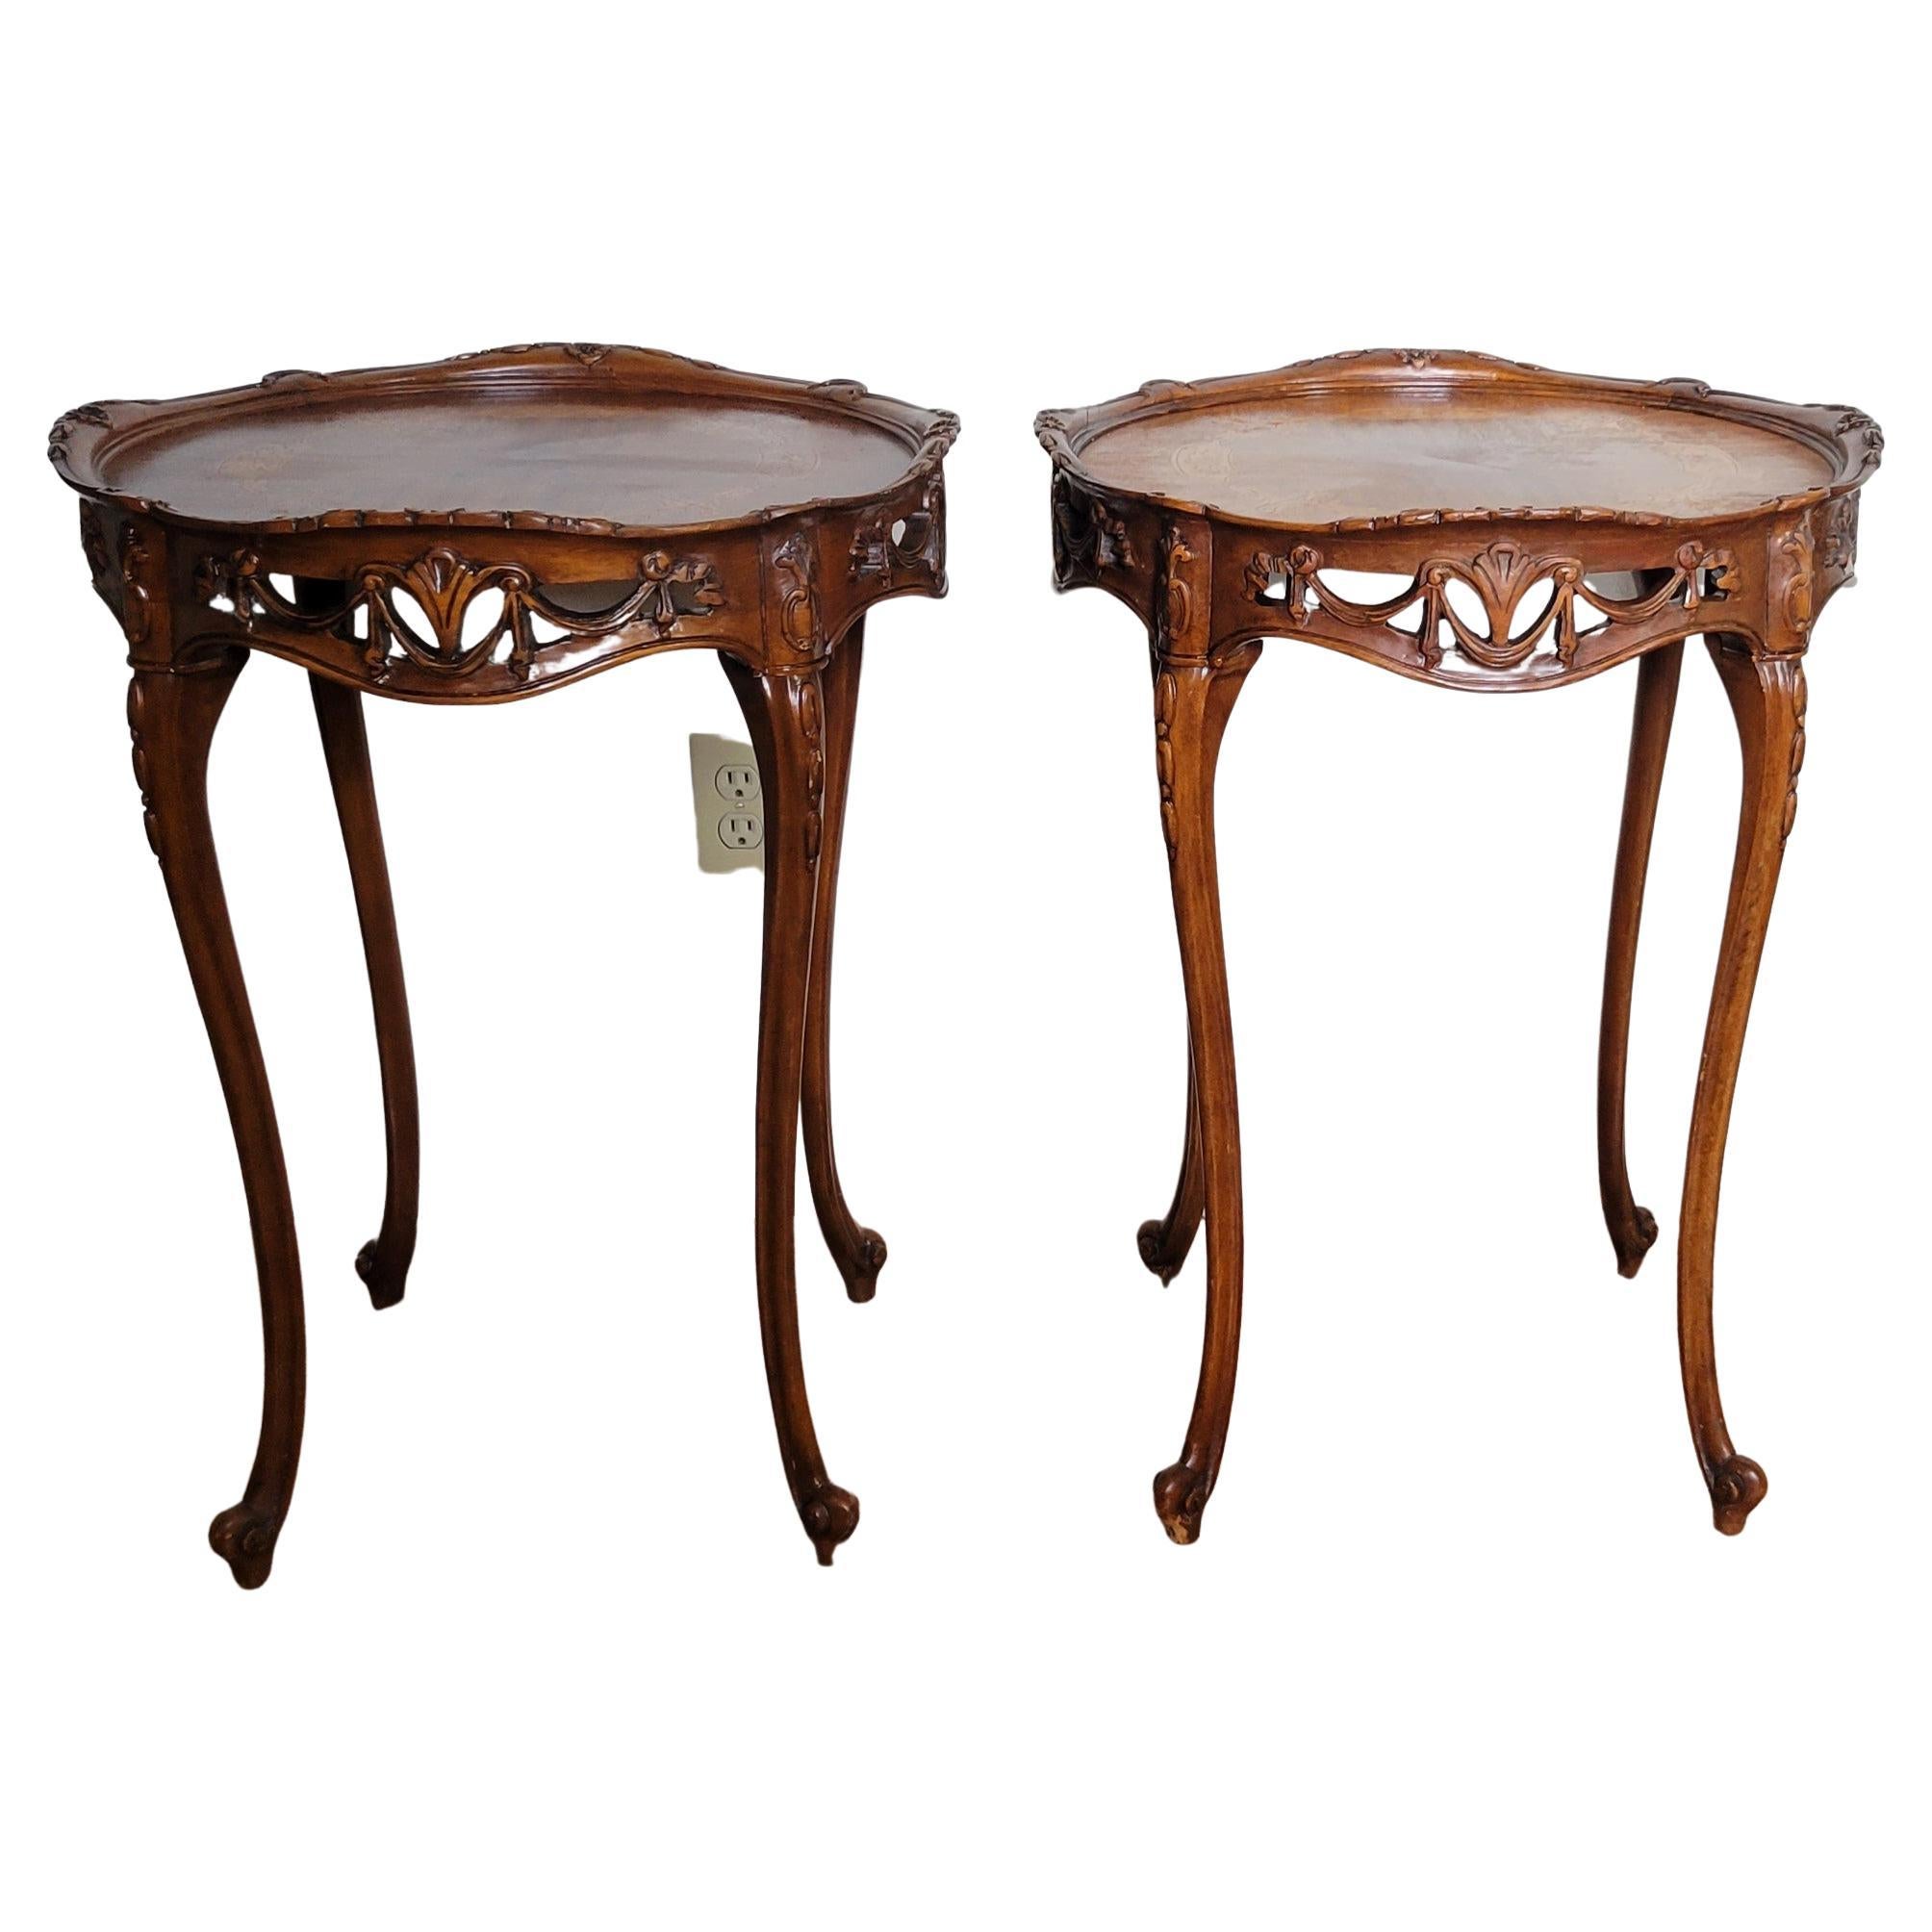 Set of '2' Antique Walnut Hand-Carved Tables with Inlays & Custom Glass For Sale